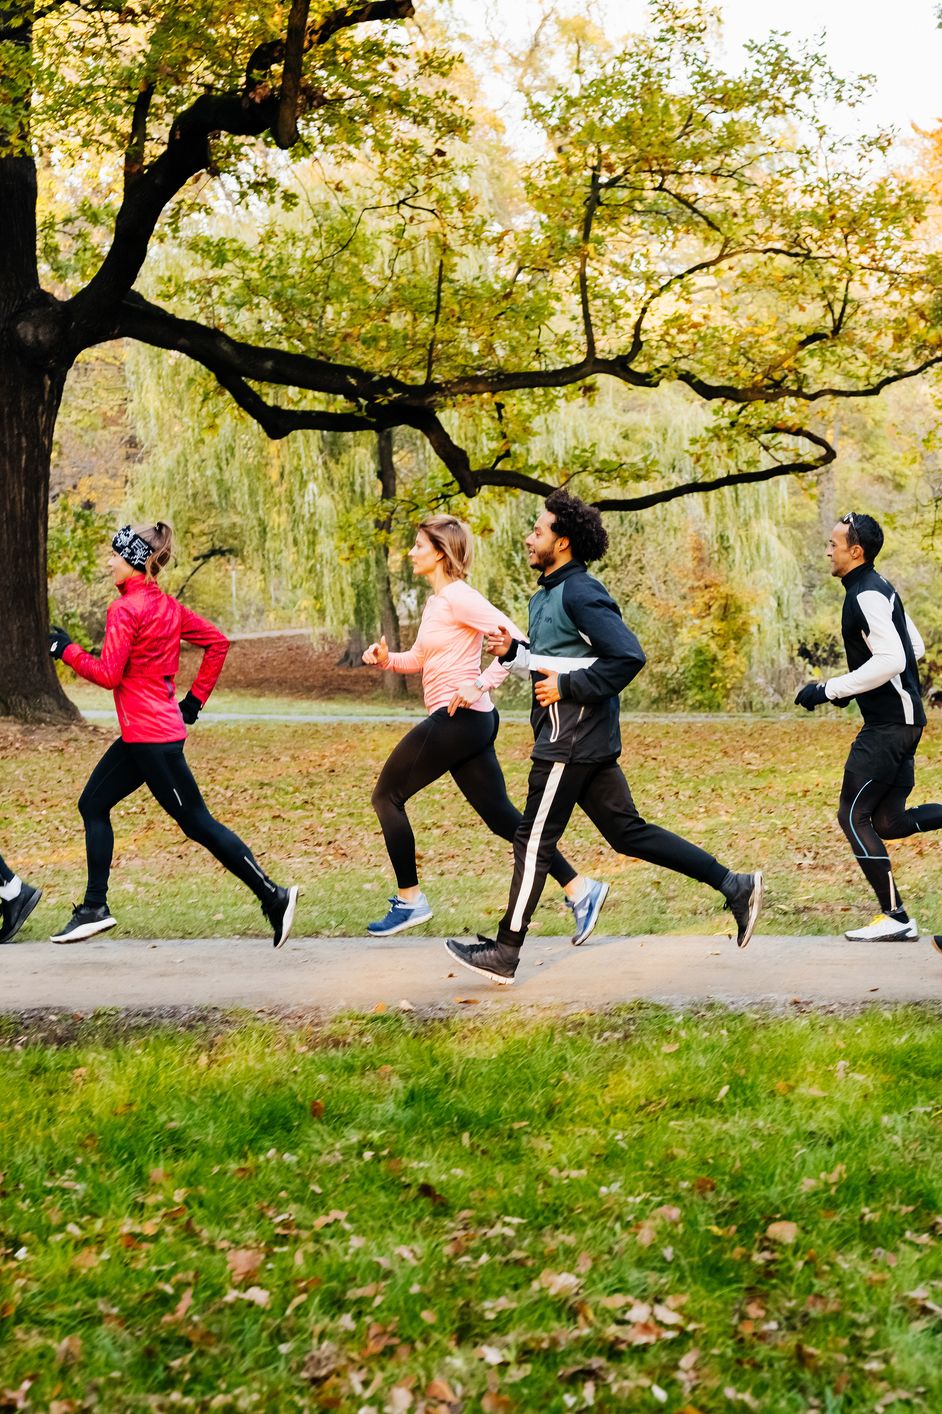 a group of runners racing through the park